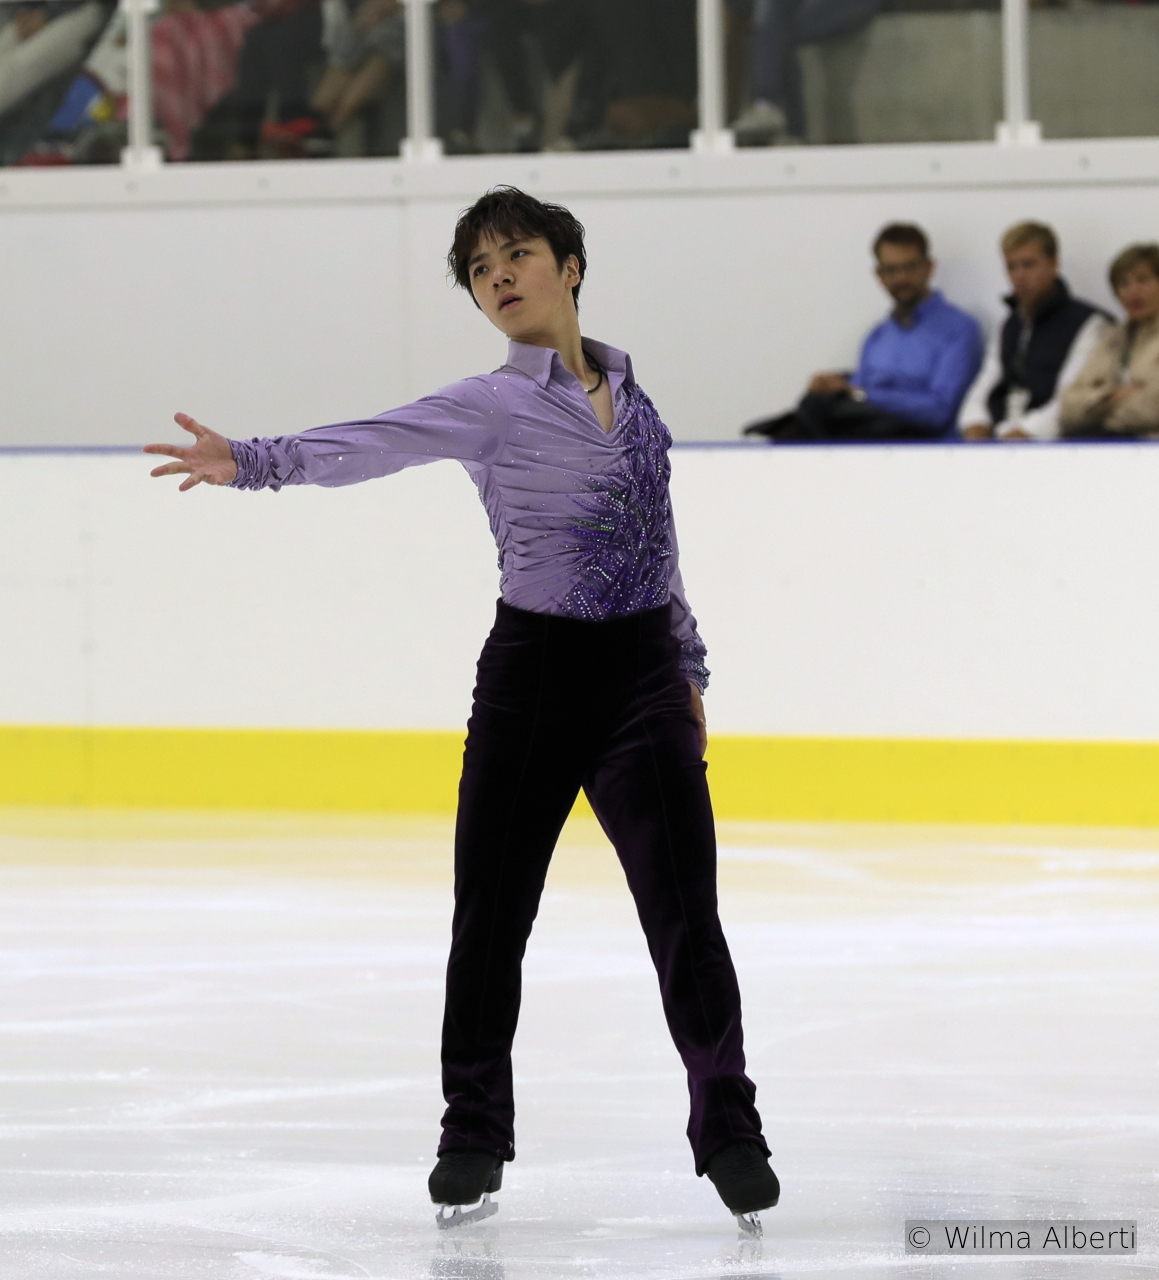 Shoma Uno during his short program, skated to „Fantasy for Violin and Orchestra”, from the movie „Ladies in Lavender”